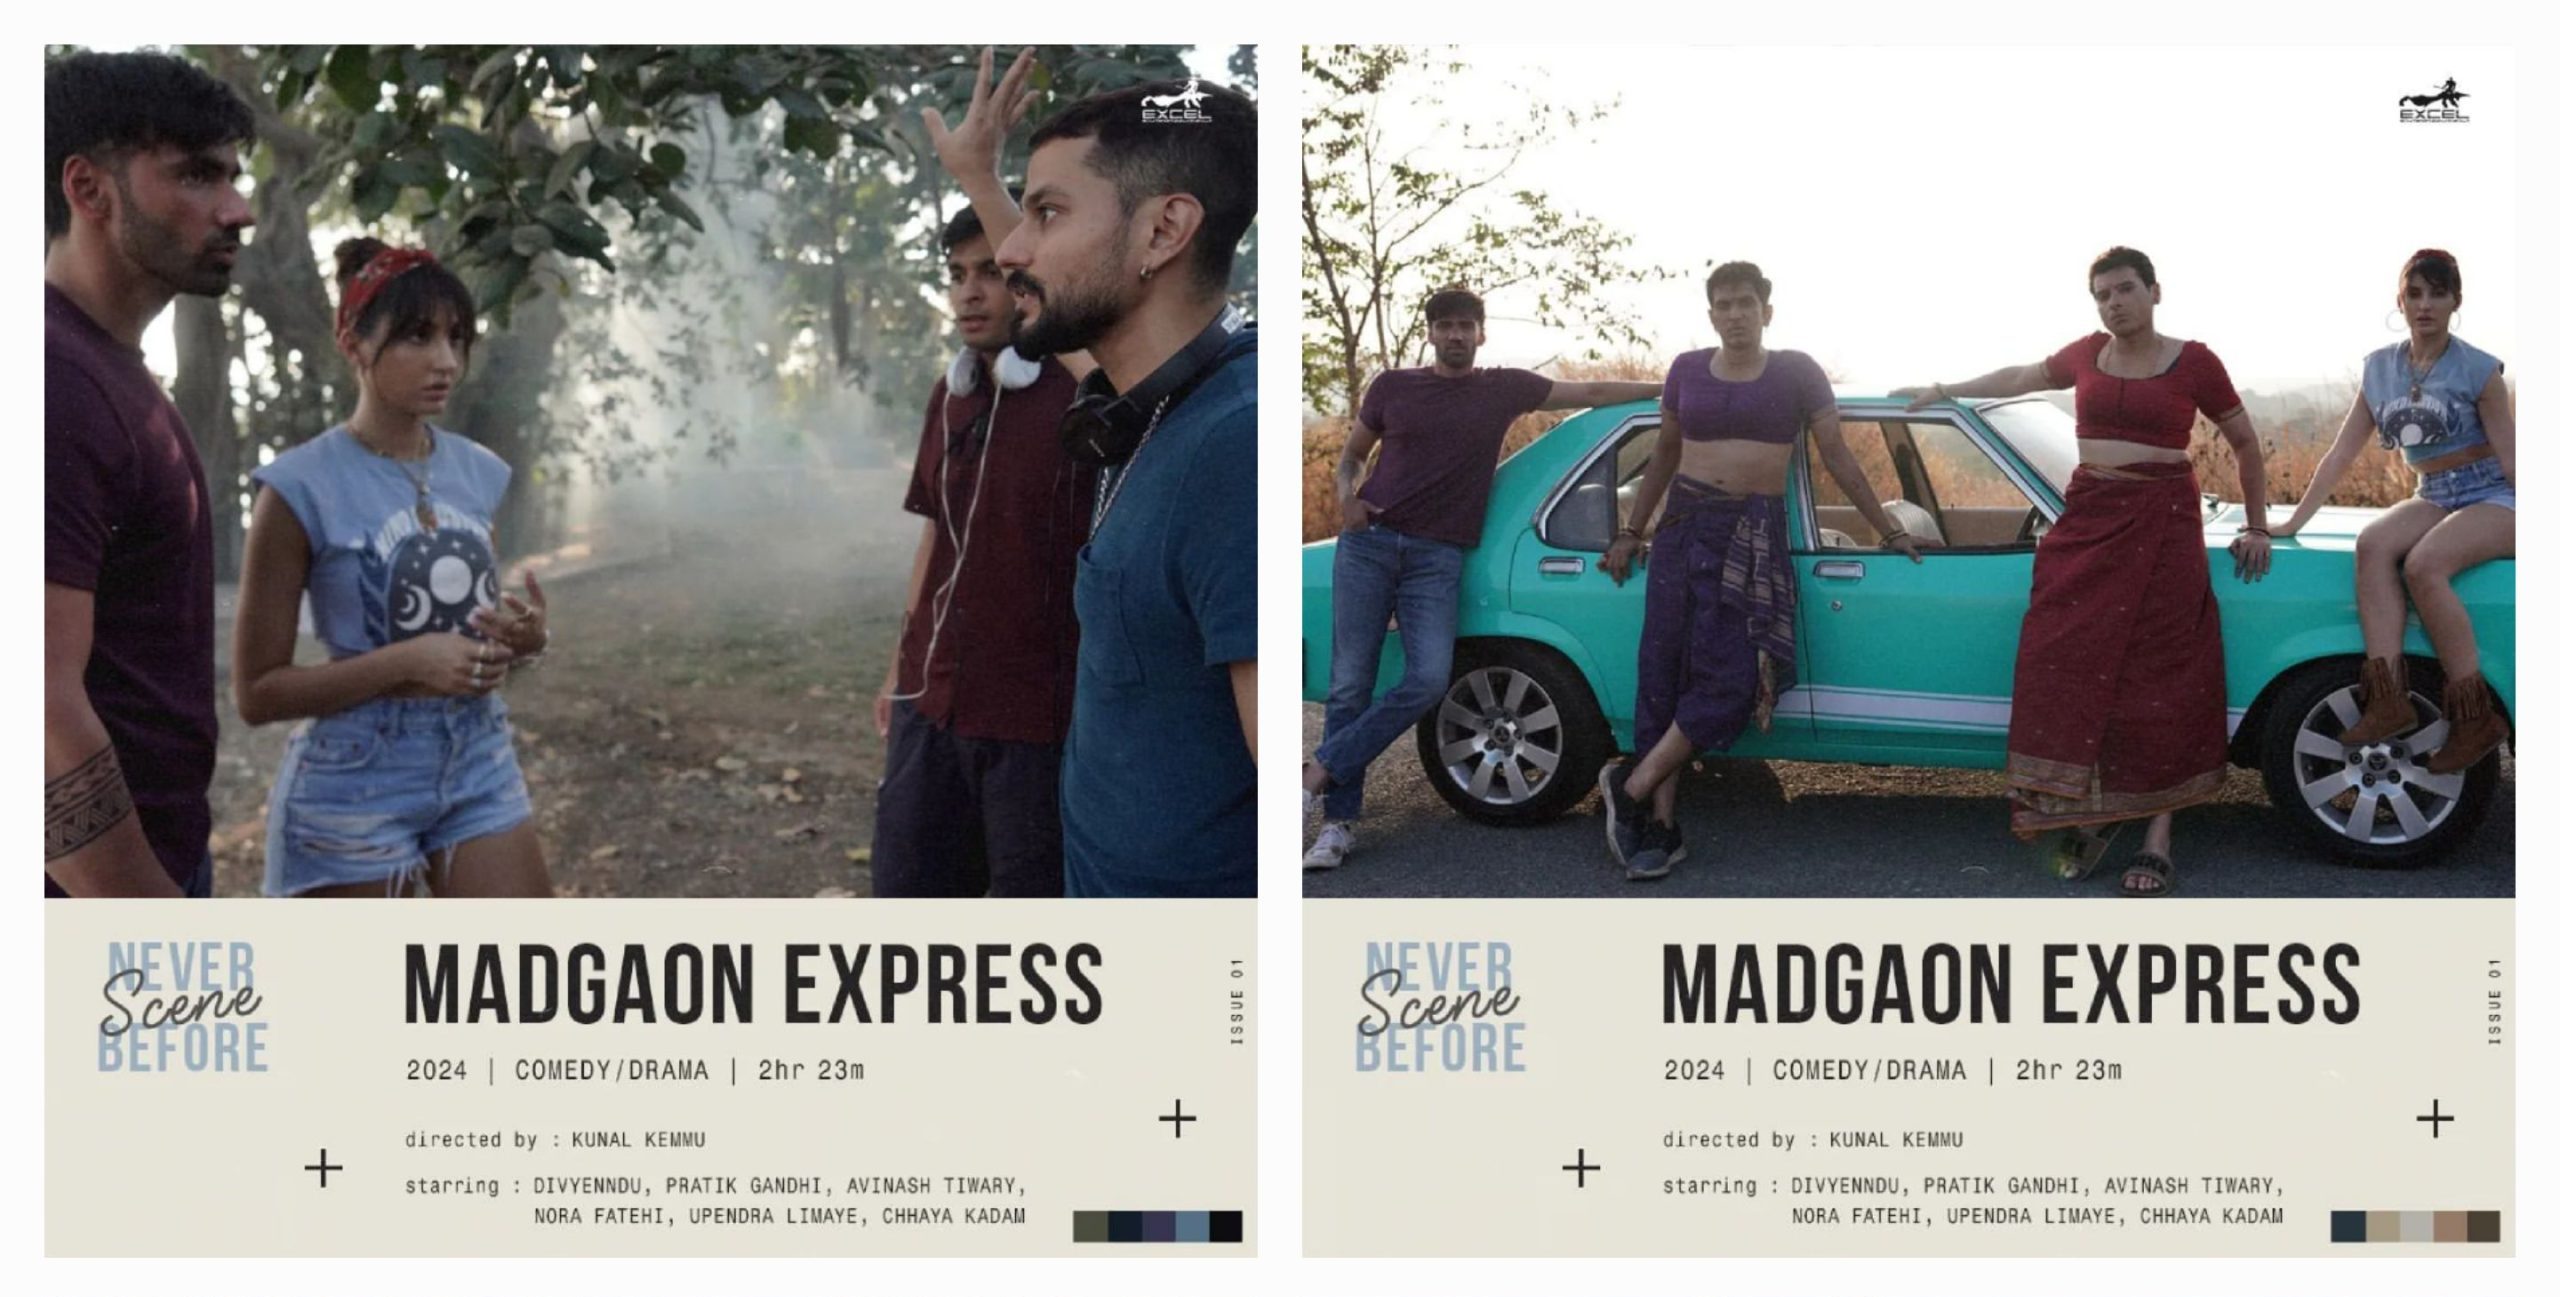 Check out the BTS madness from the sets of Madgaon Express!